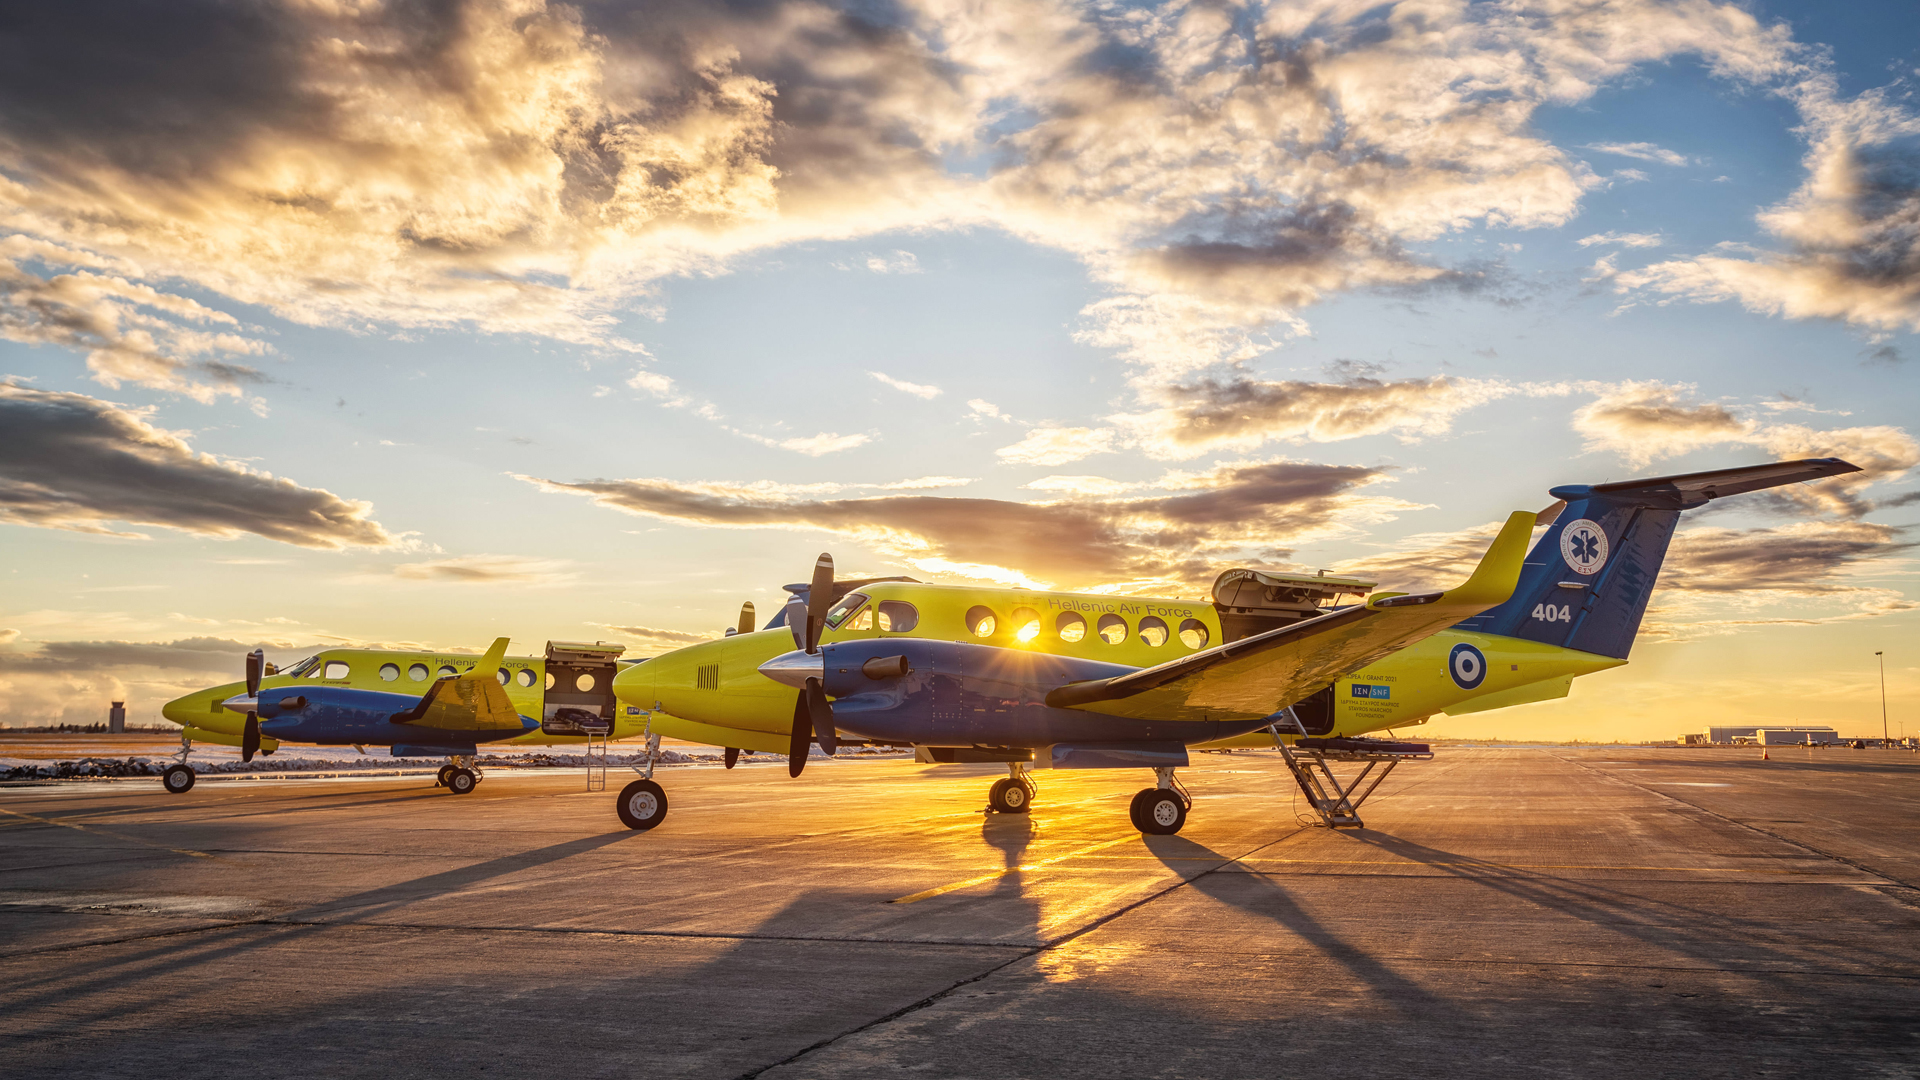 Two yellow and blue medevac propeller planes with the SNF logo and an evil eye sit on the tarmac as the sun sets in the background